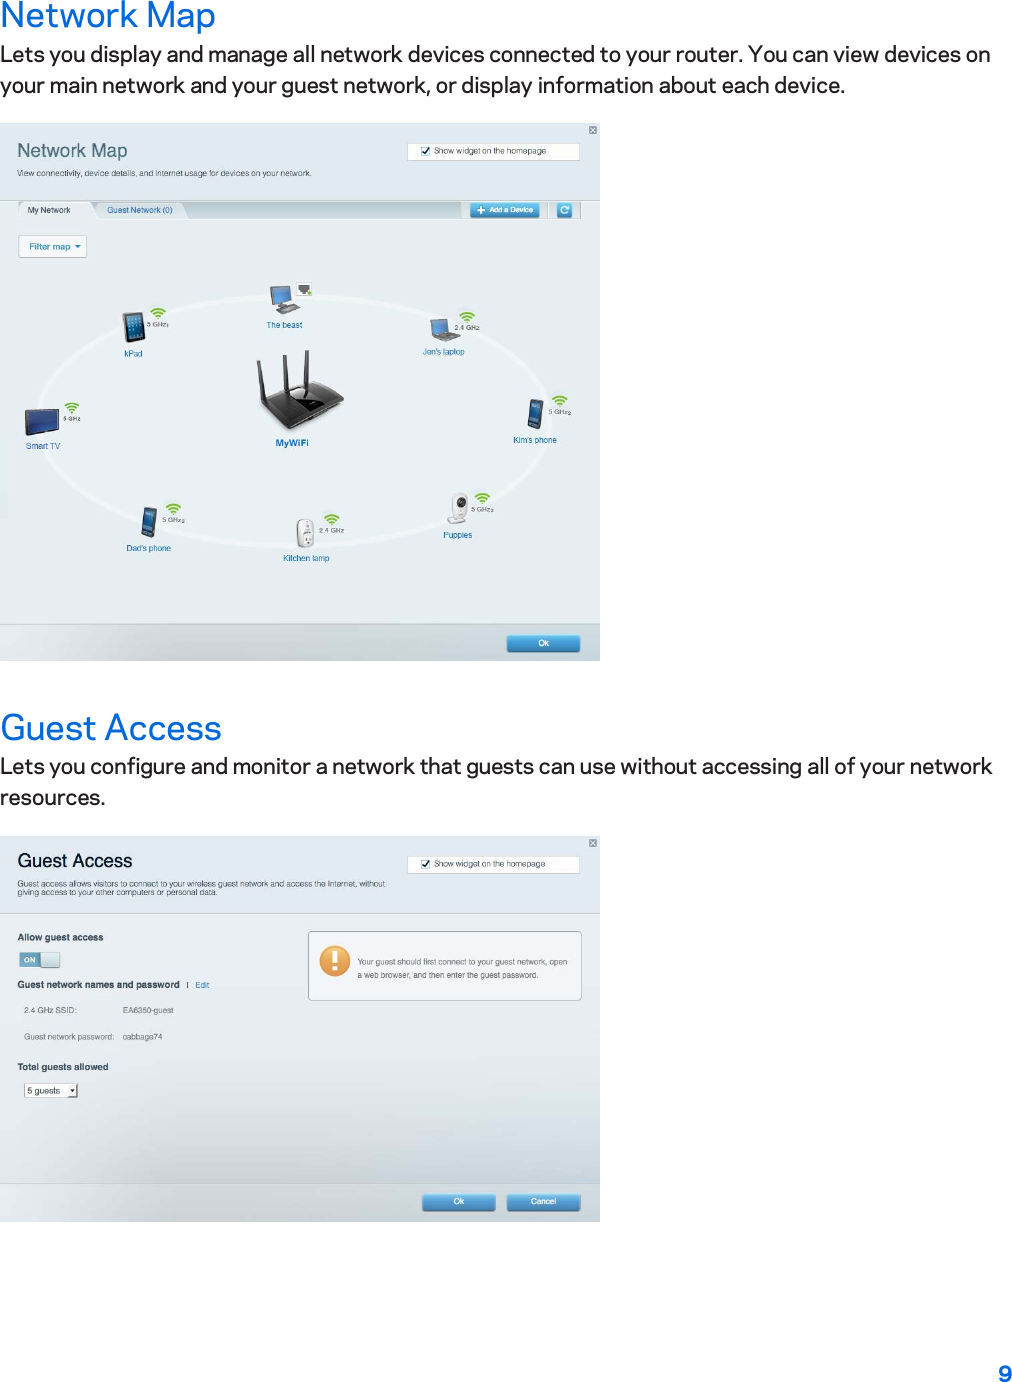 9  Network Map Lets you display and manage all network devices connected to your router. You can view devices on your main network and your guest network, or display information about each device.  Guest Access Lets you configure and monitor a network that guests can use without accessing all of your network resources.  